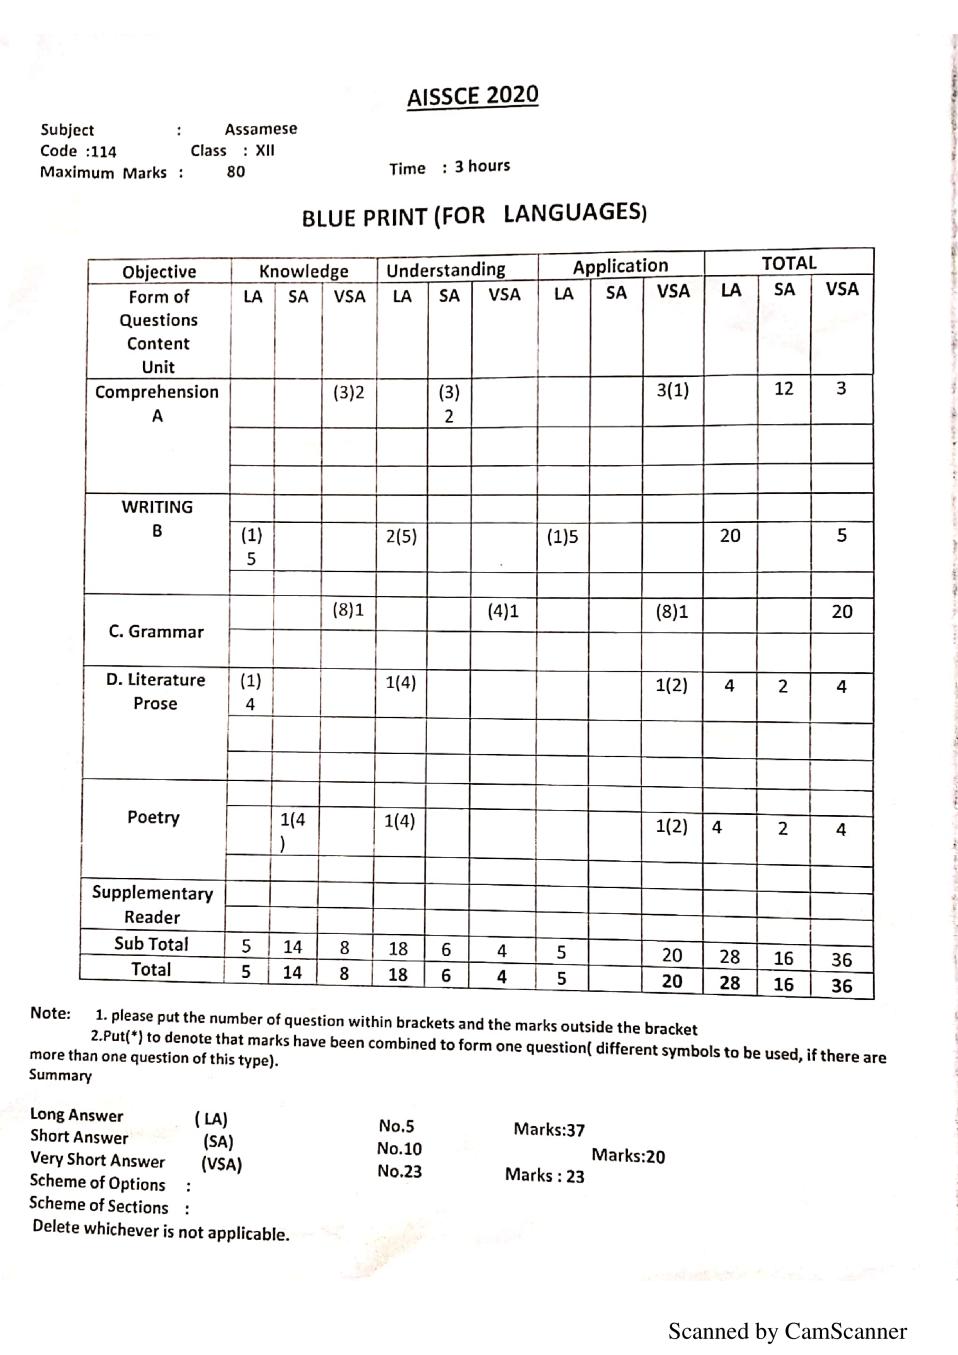 CBSE Class 12 Sample Paper 2020 for Assamese - Page 1